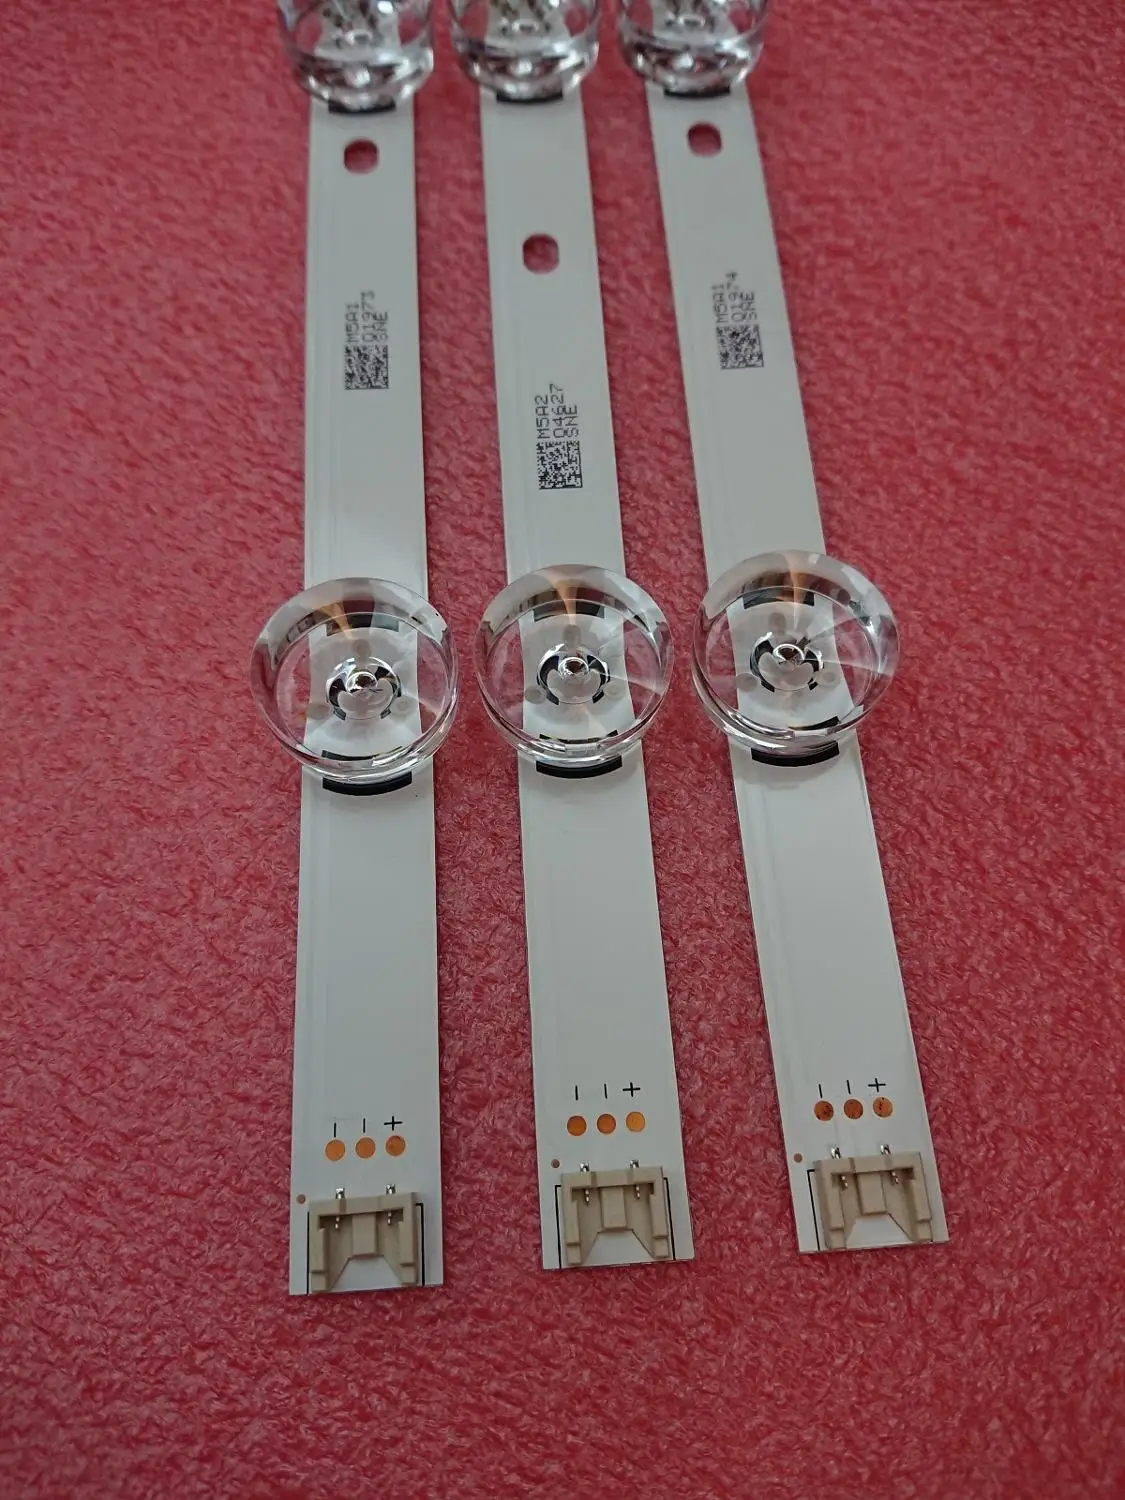 3 pcs led strip for lg 32lb5800 32lb563u 32lf560v lgit uot a b 6916l 1974a 1975a 6916l 2223a 2224a wrooee 0418d 0419d free global shipping